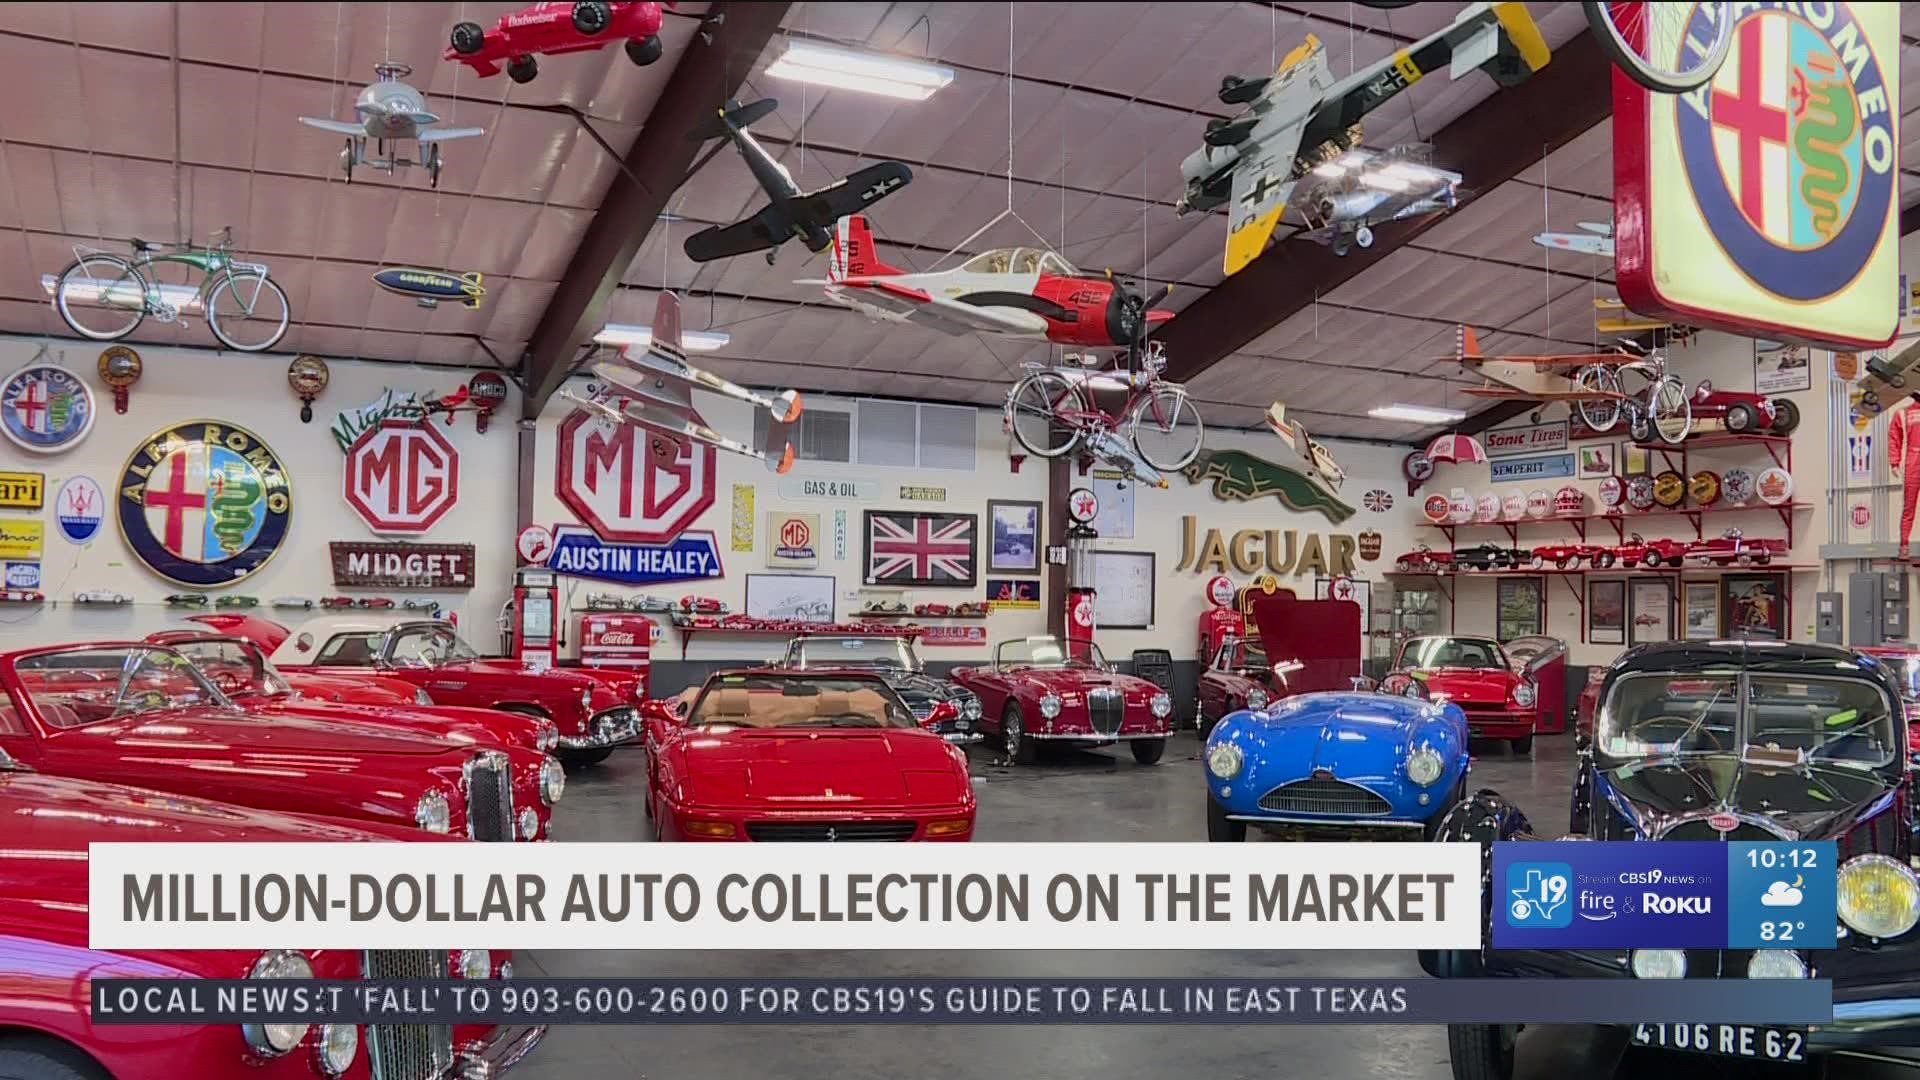 "Some people want to collect Rembrandts or Van Goghs," Gene Ponder said. "To me these classic cars are works of art."